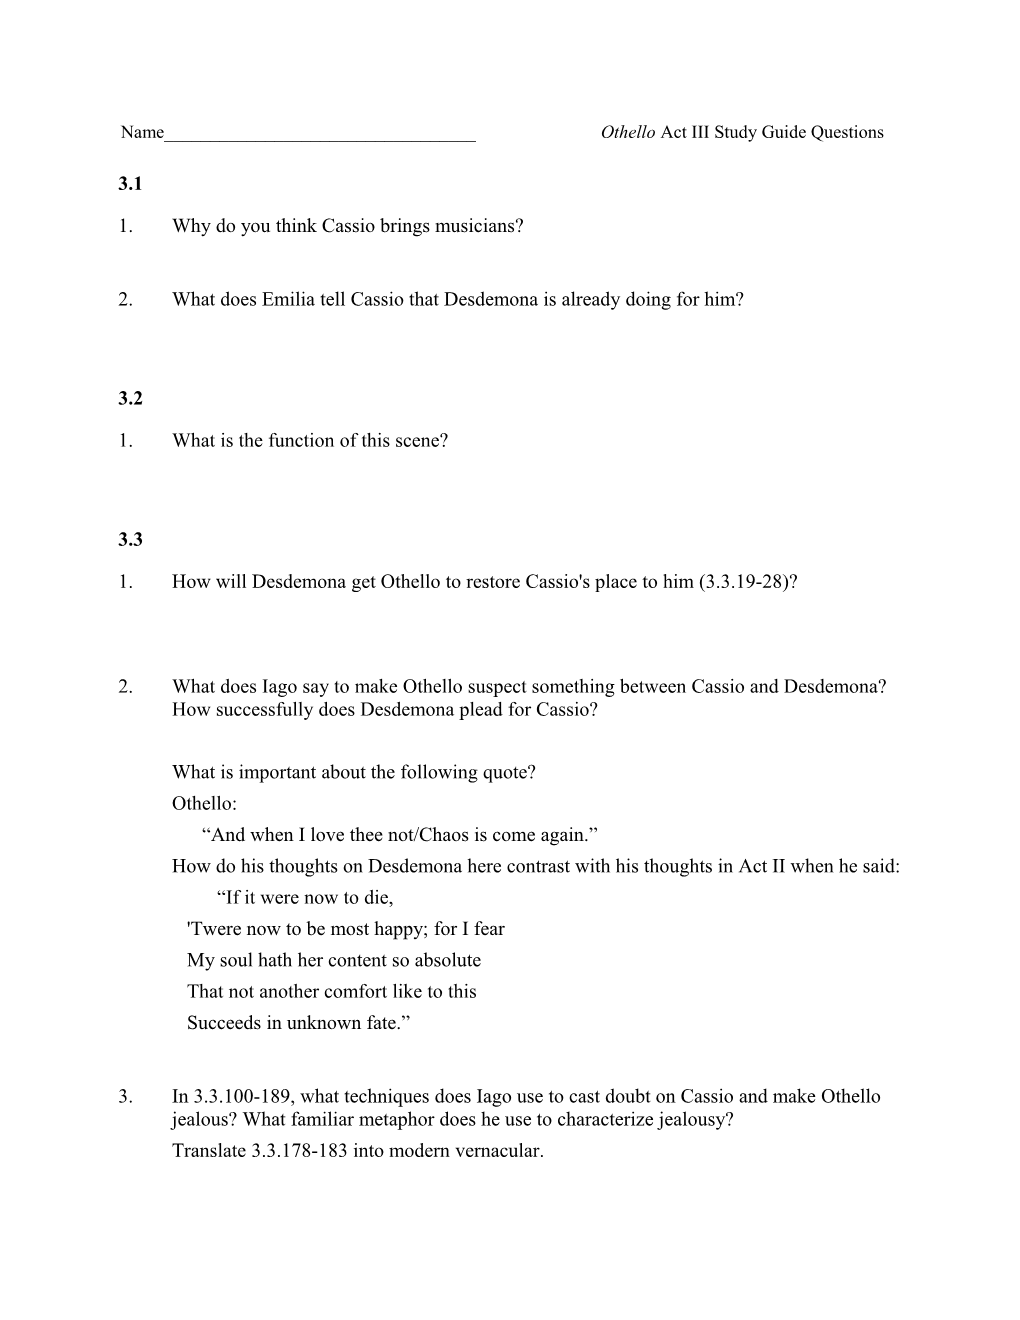 Name______Othello Act III Study Guide Questions